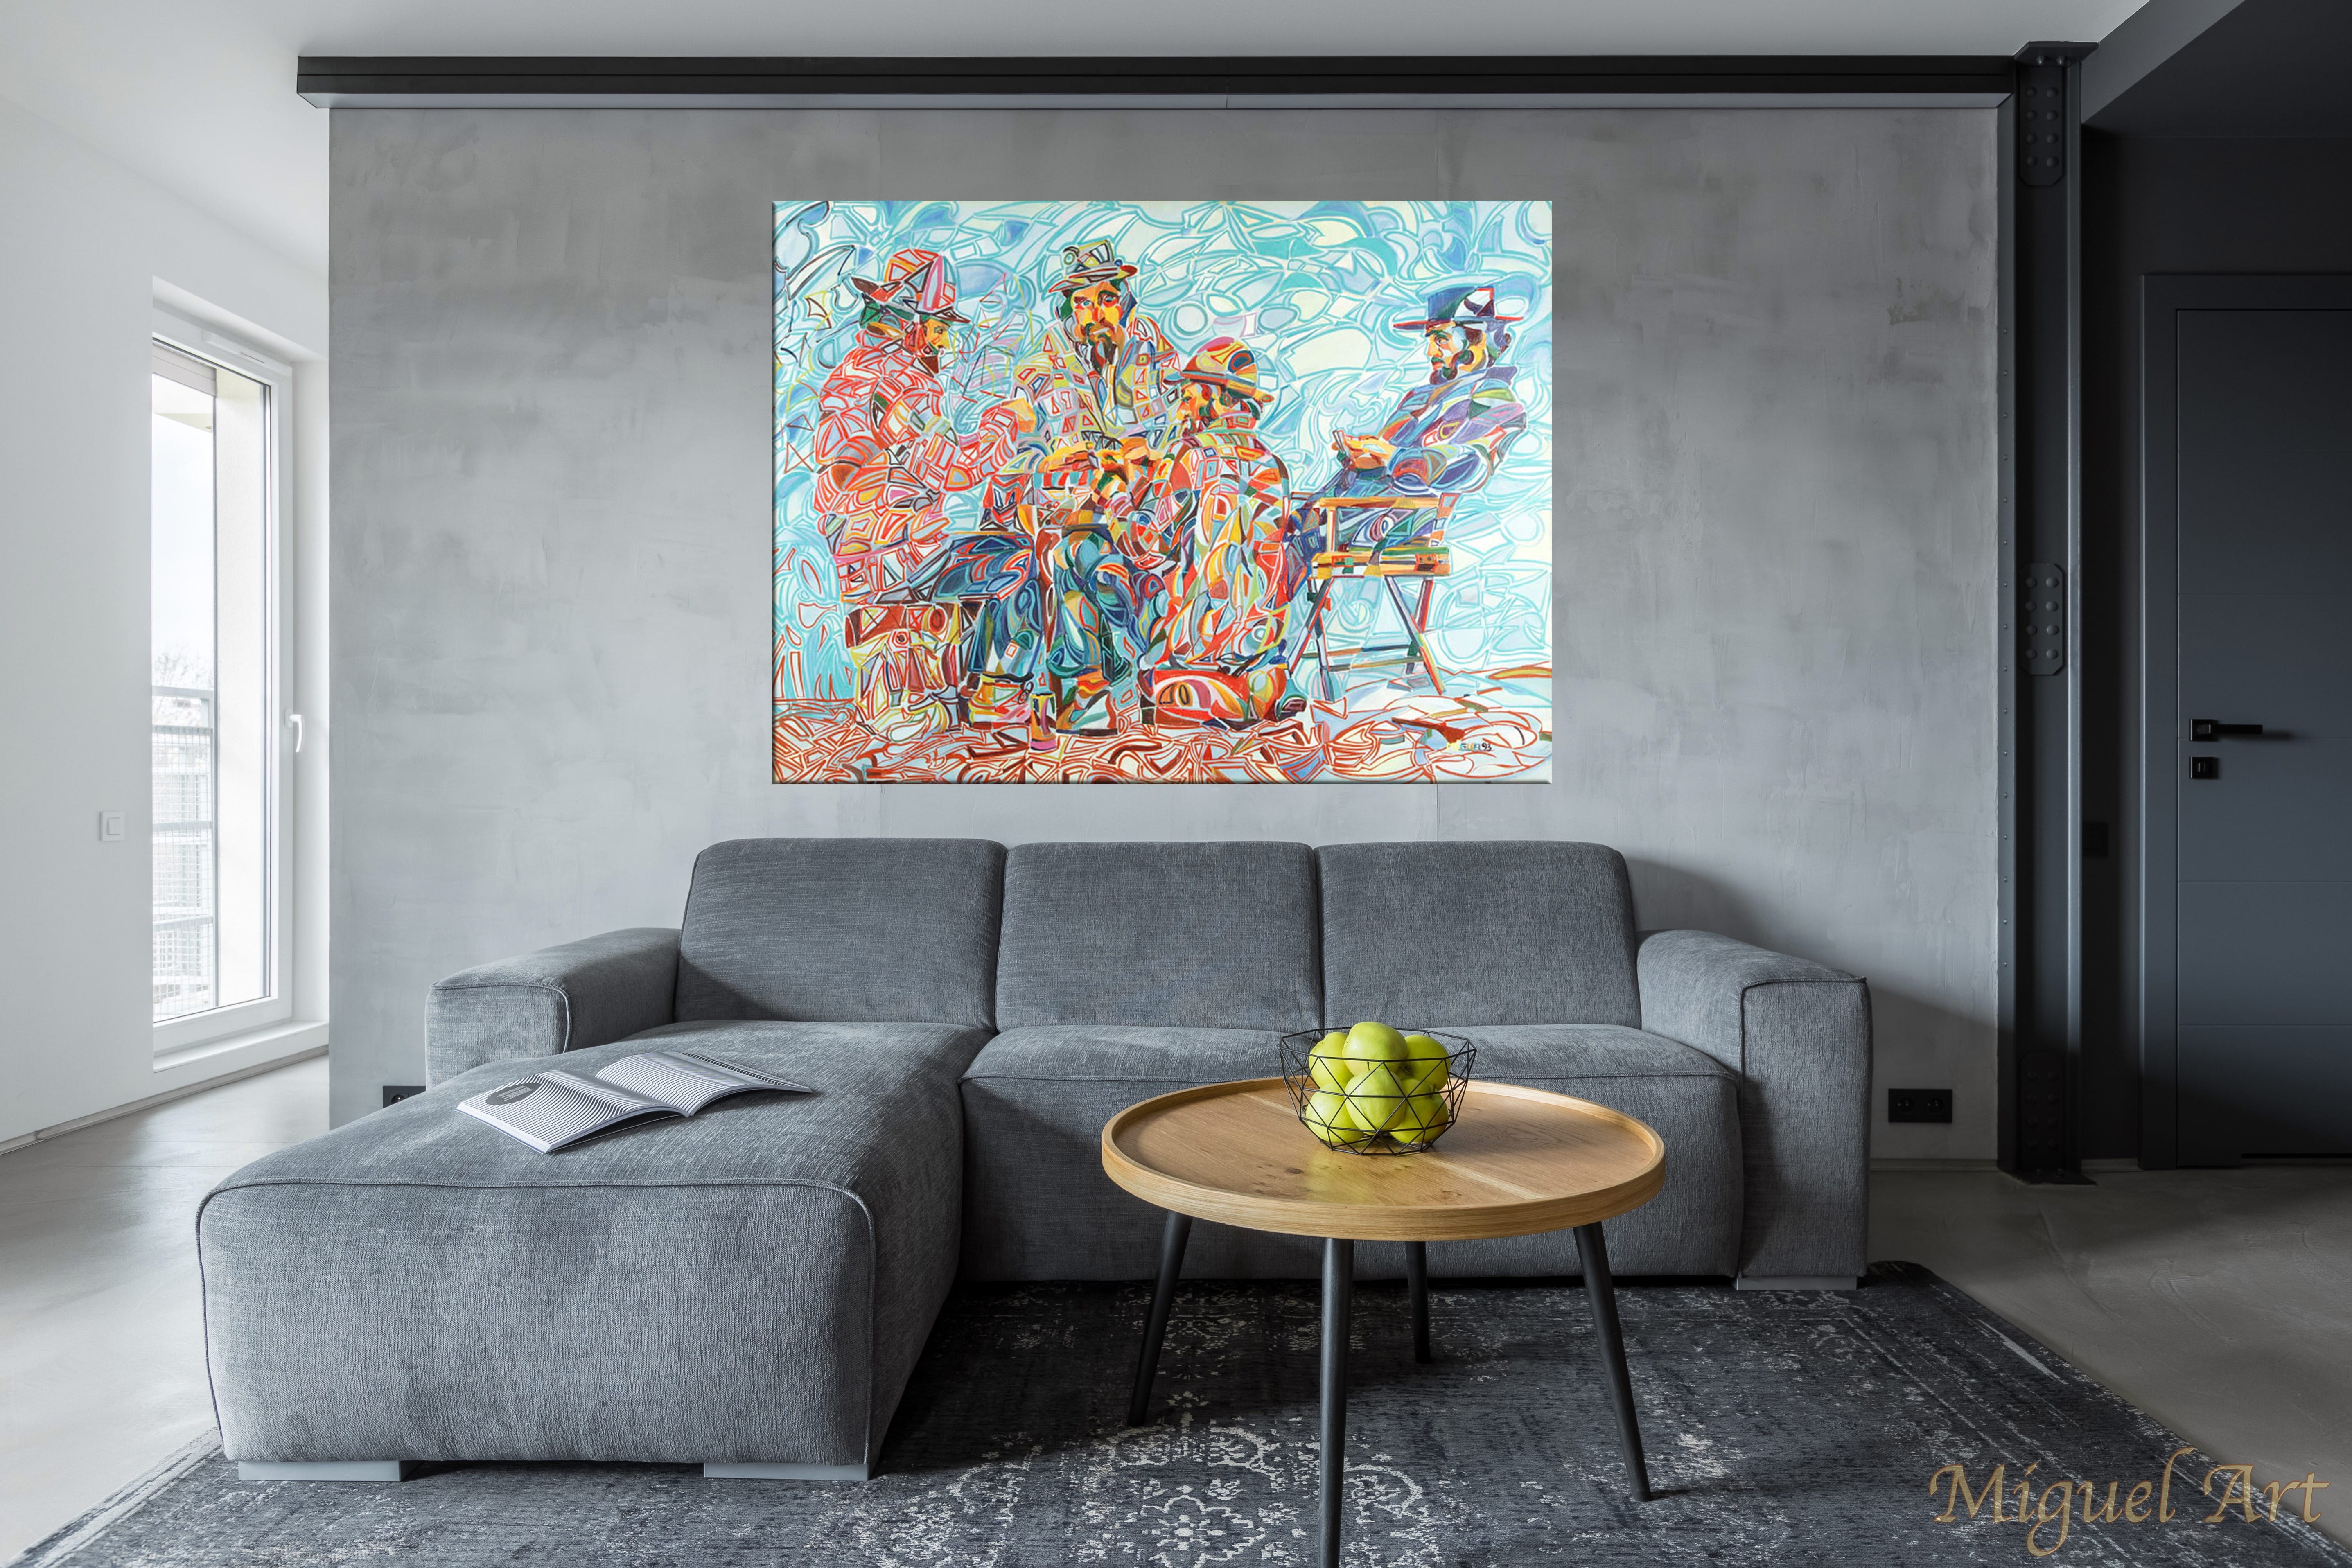 Painting of All In displayed on the wall above a grey couch